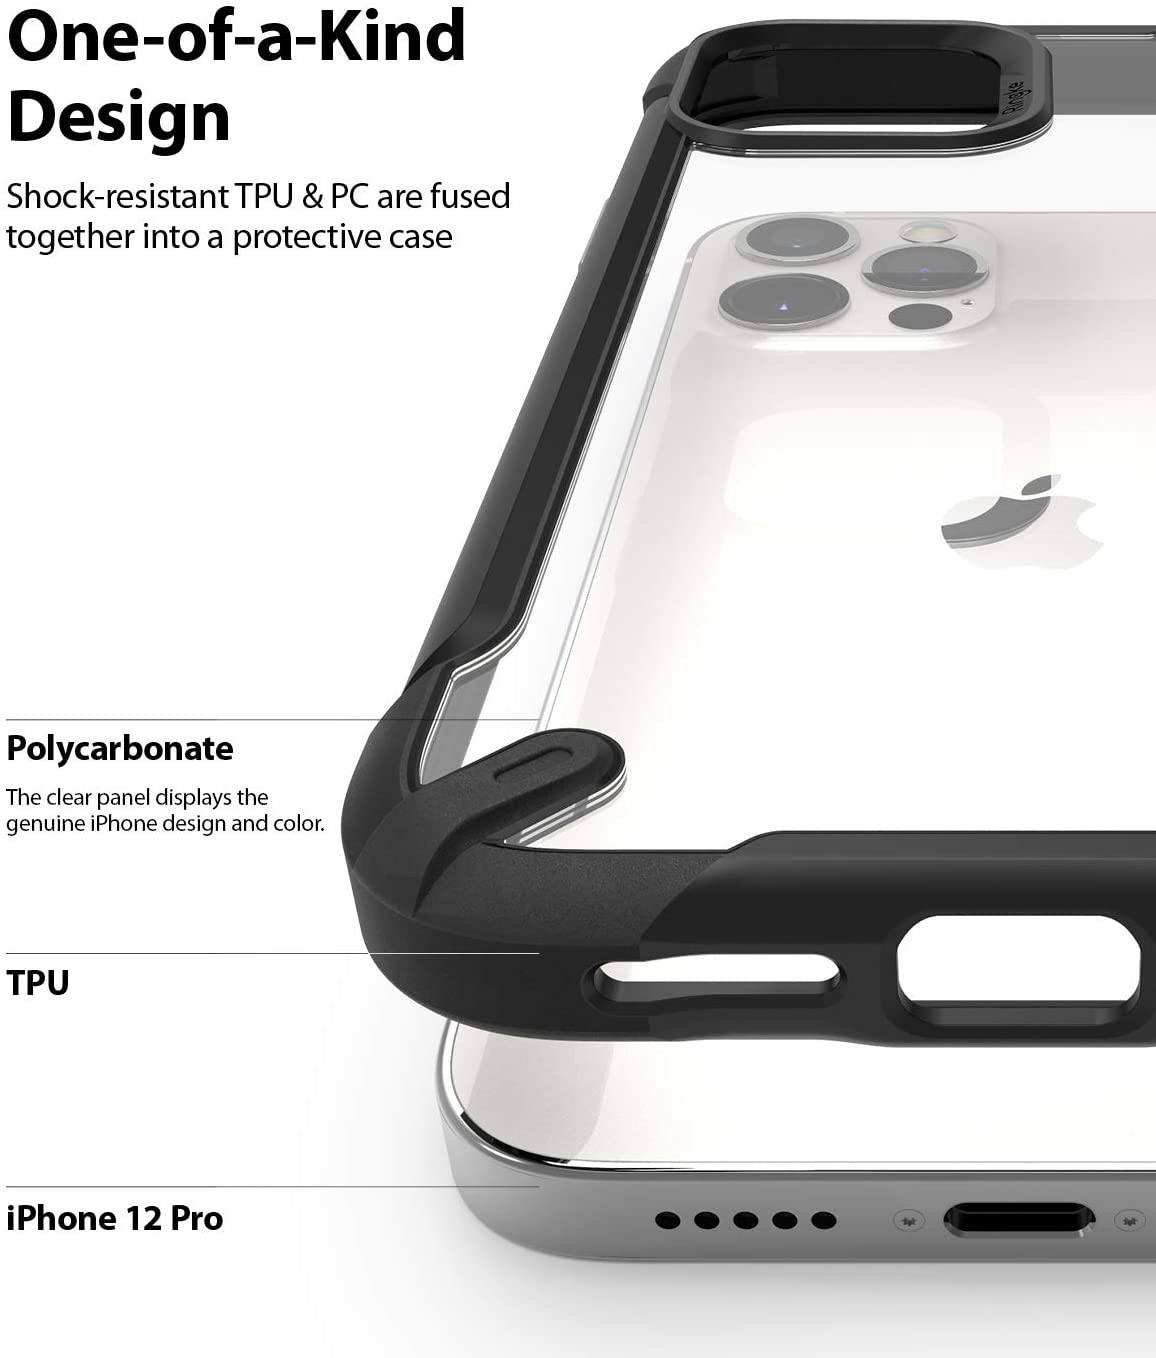 Ringke Fusion-X2 iPhone 12 / Pro / Pro Max Transparent Back Shockproof Upgraded Side Grip Flexible TPU Phone Cover Black